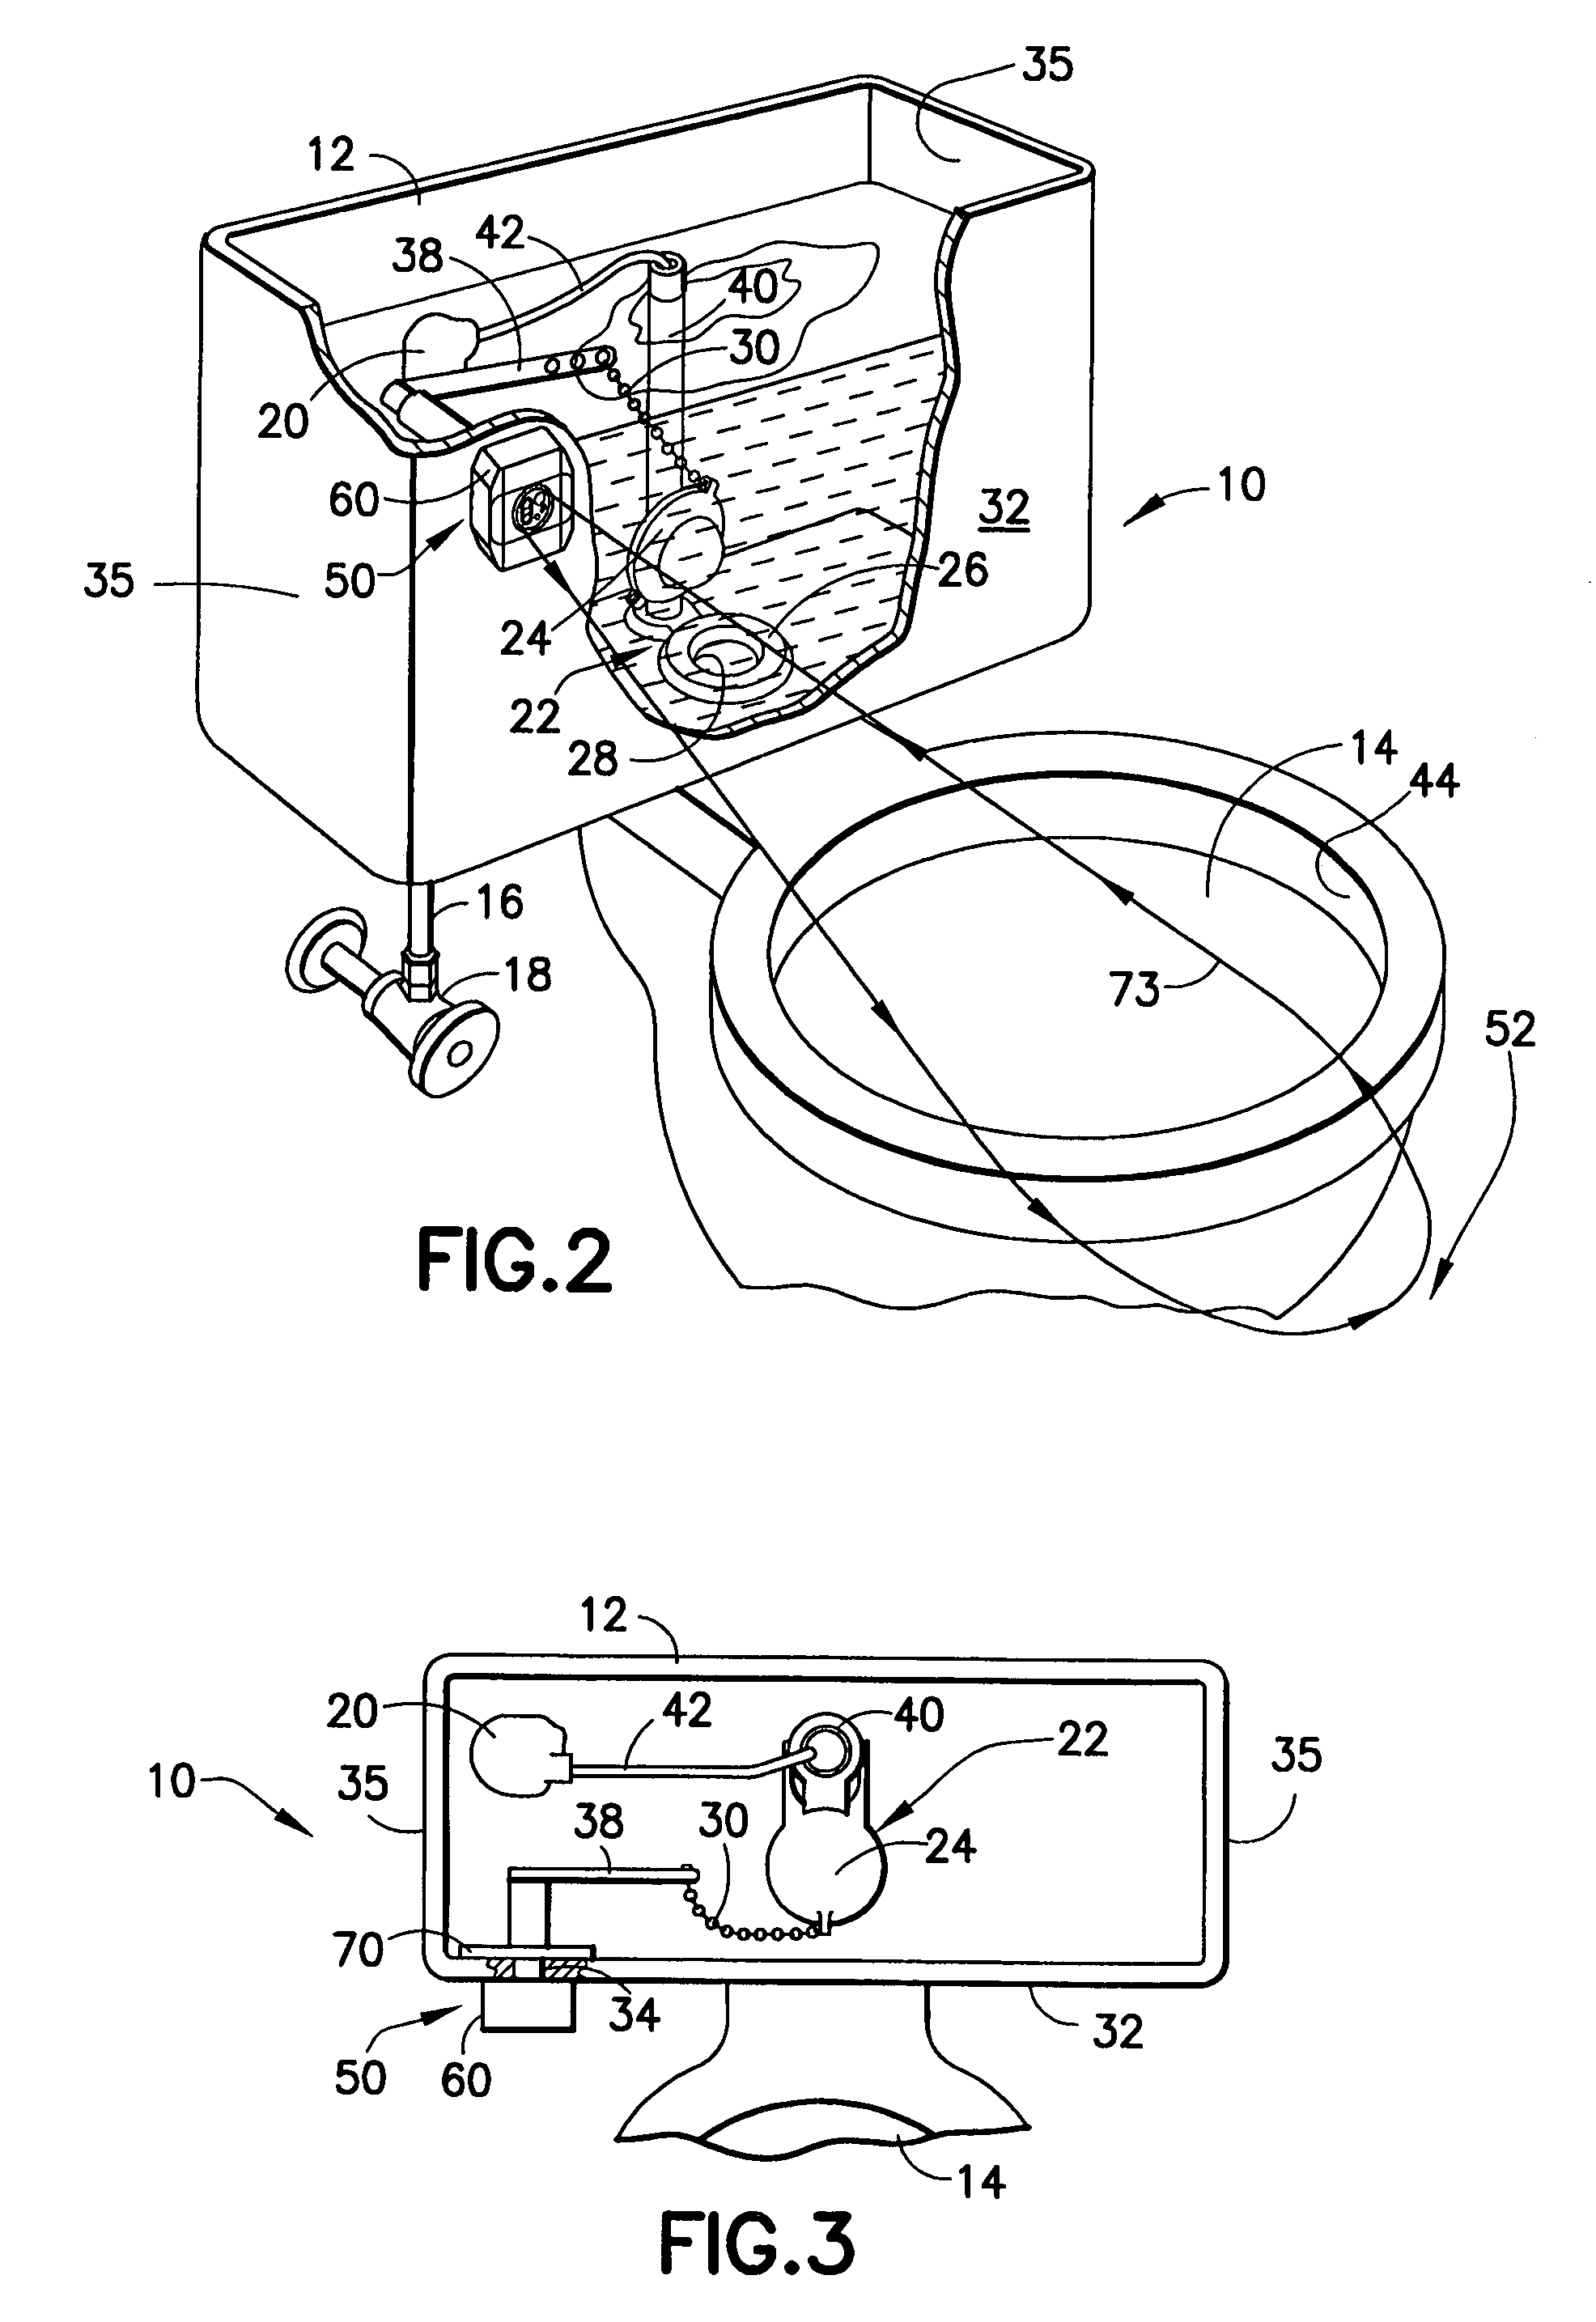 Automatic toilet flushing system and method